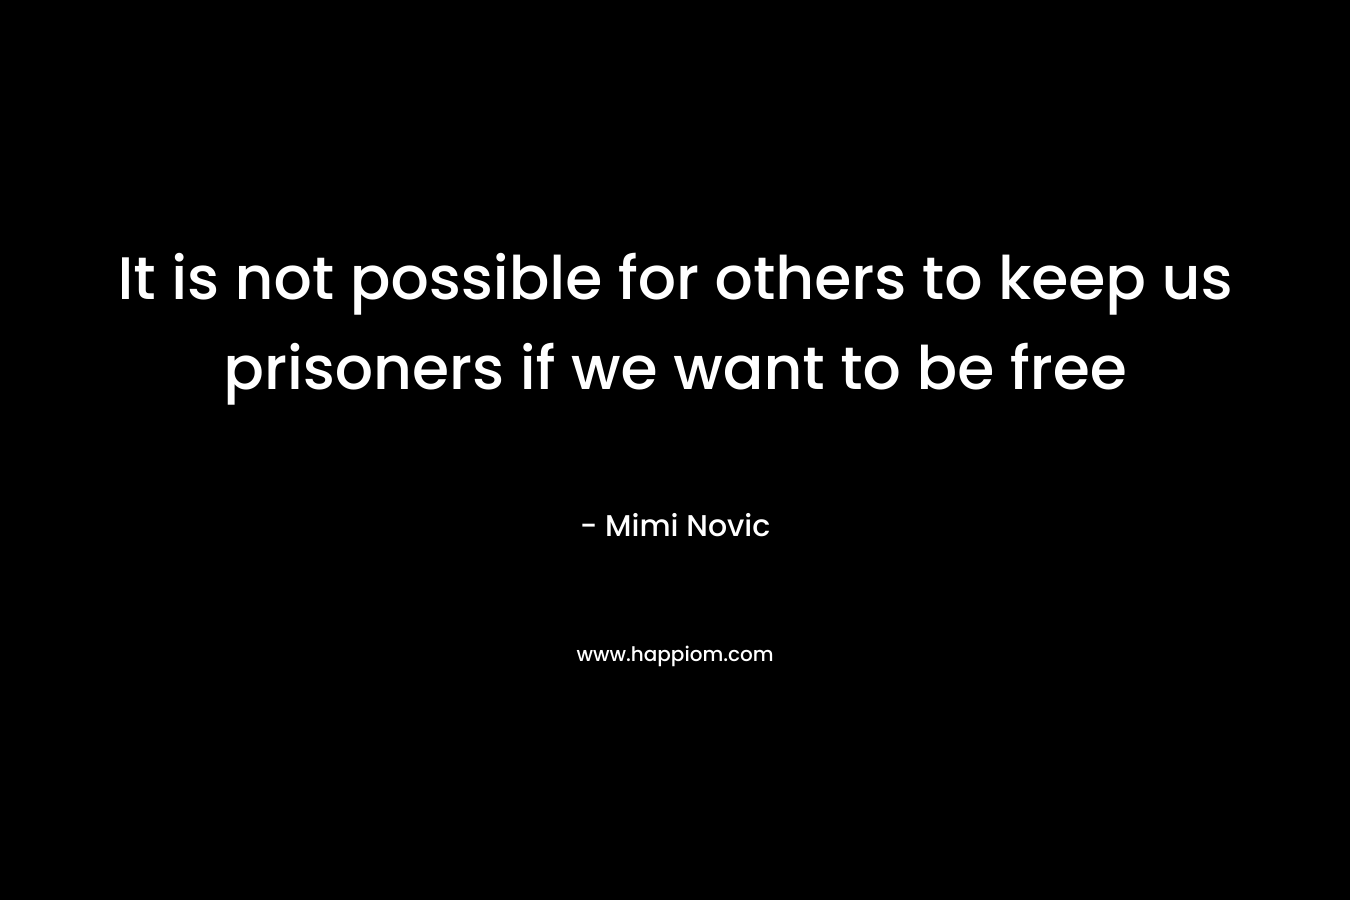 It is not possible for others to keep us prisoners if we want to be free – Mimi Novic